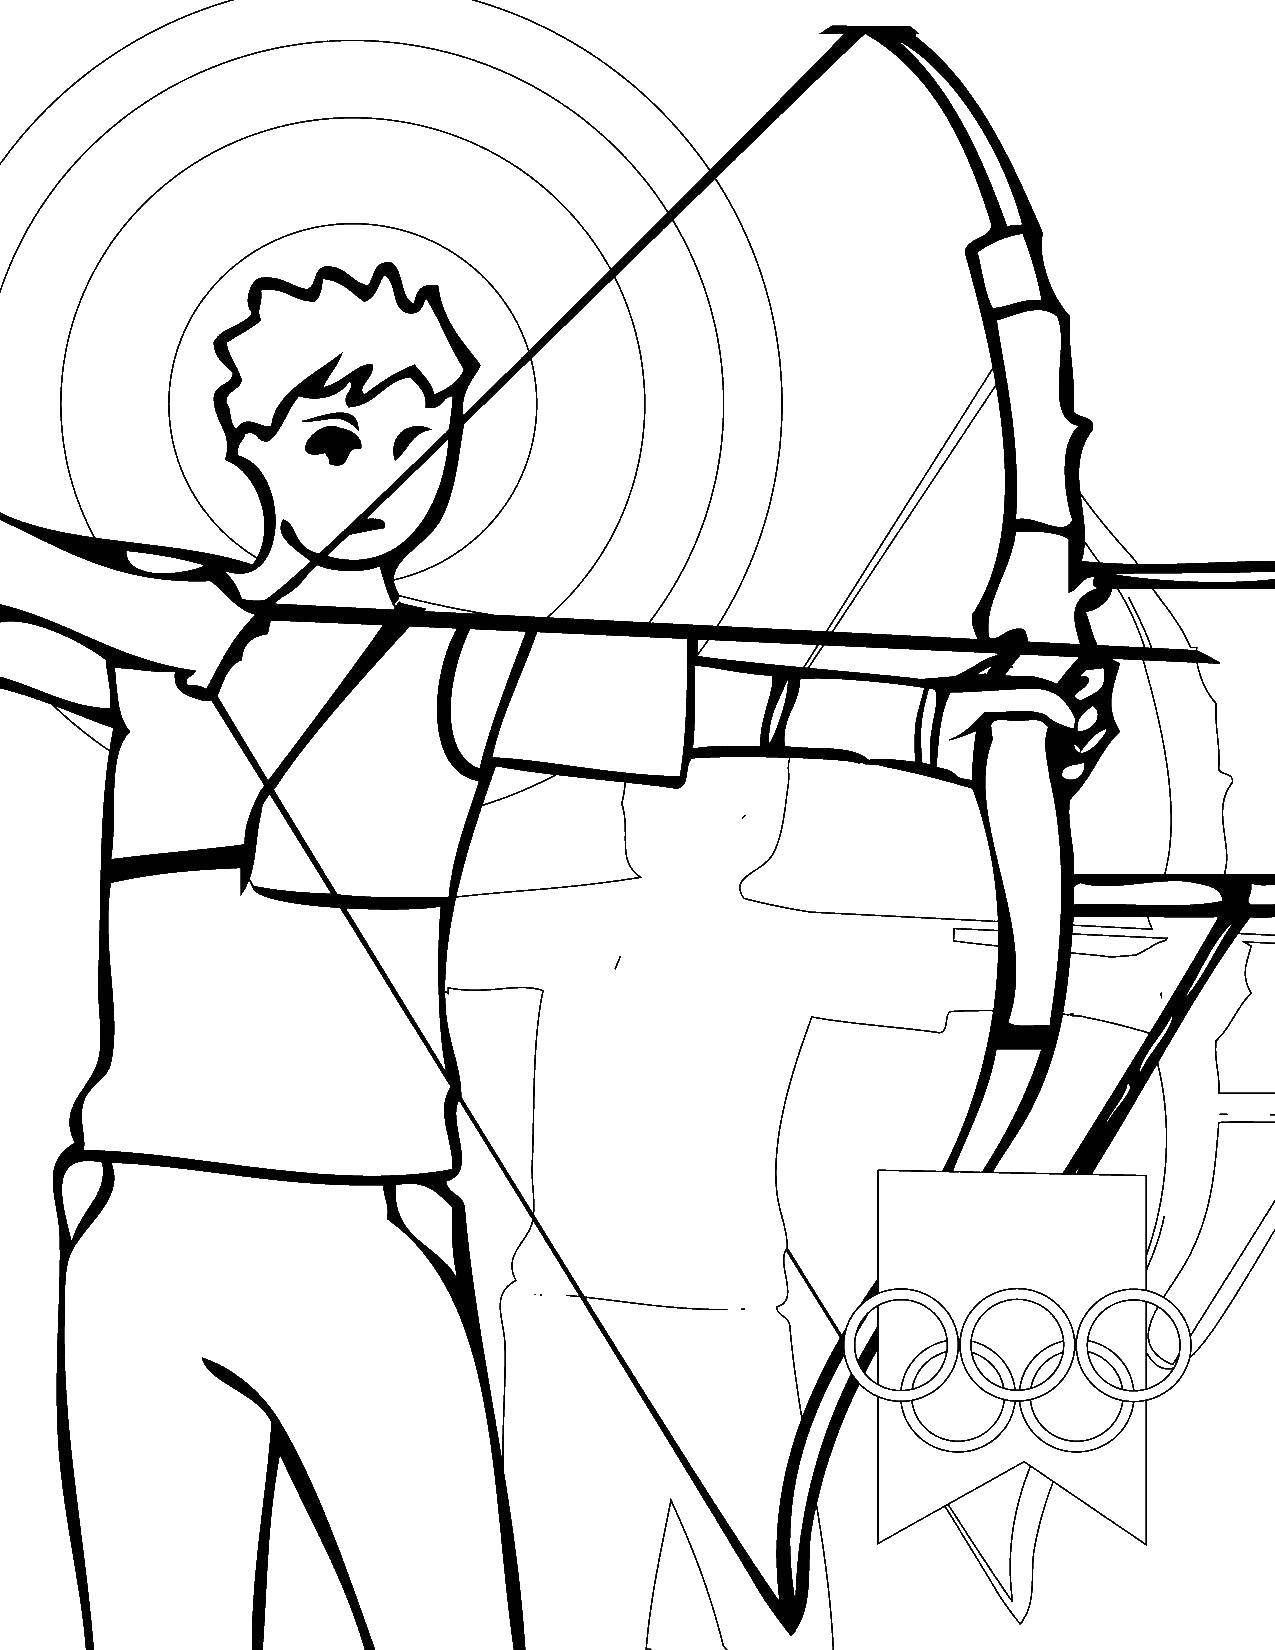 Coloring Archer. Category the Olympic games . Tags:  Archer, Olympic games.